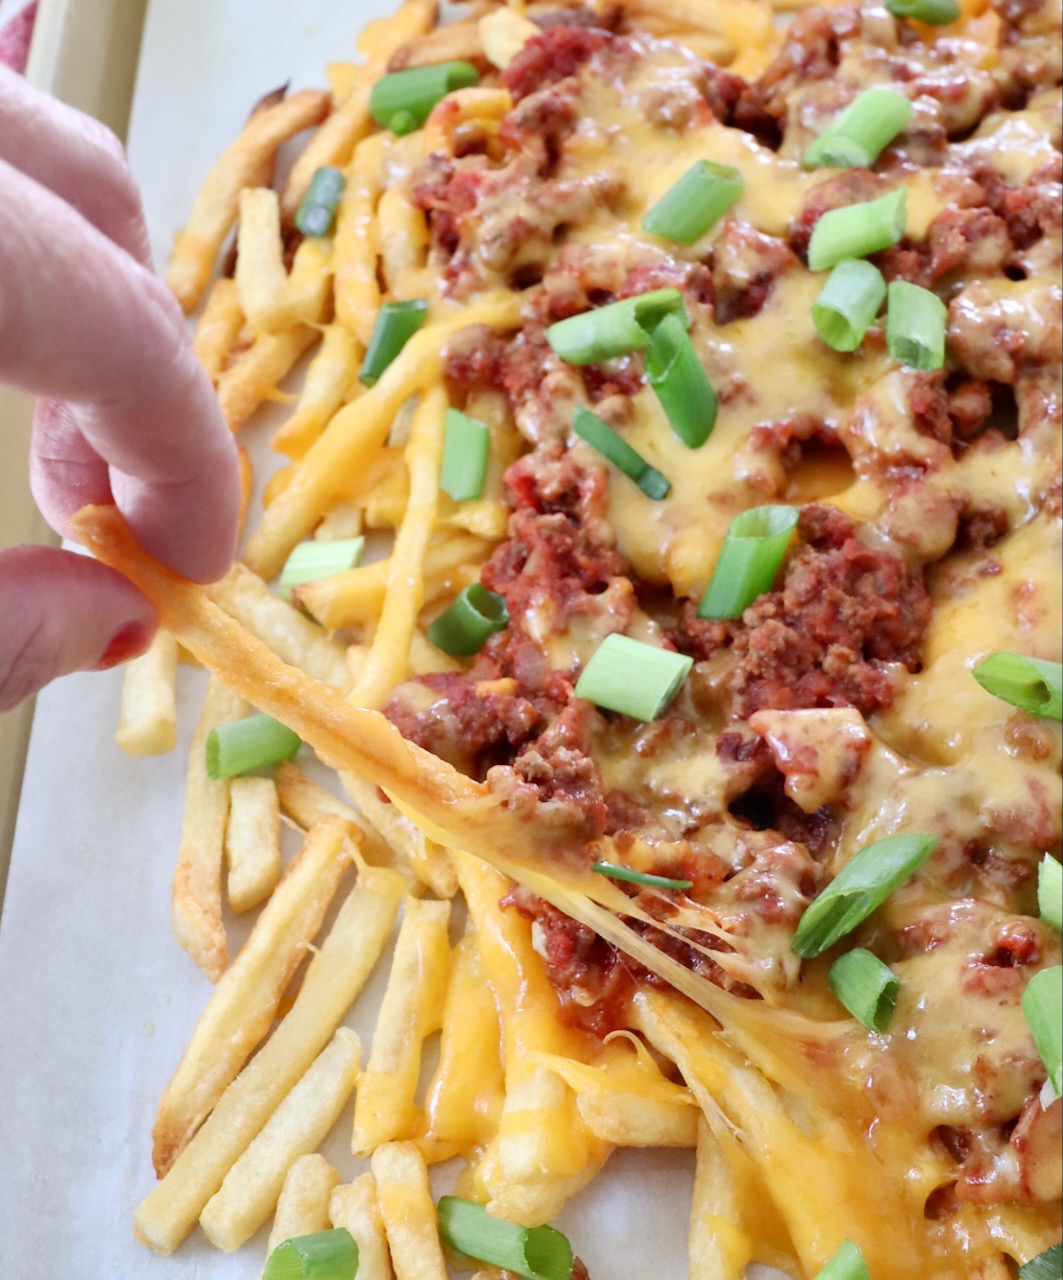 hand pulling cheese fry from baking sheet of chili cheese fries